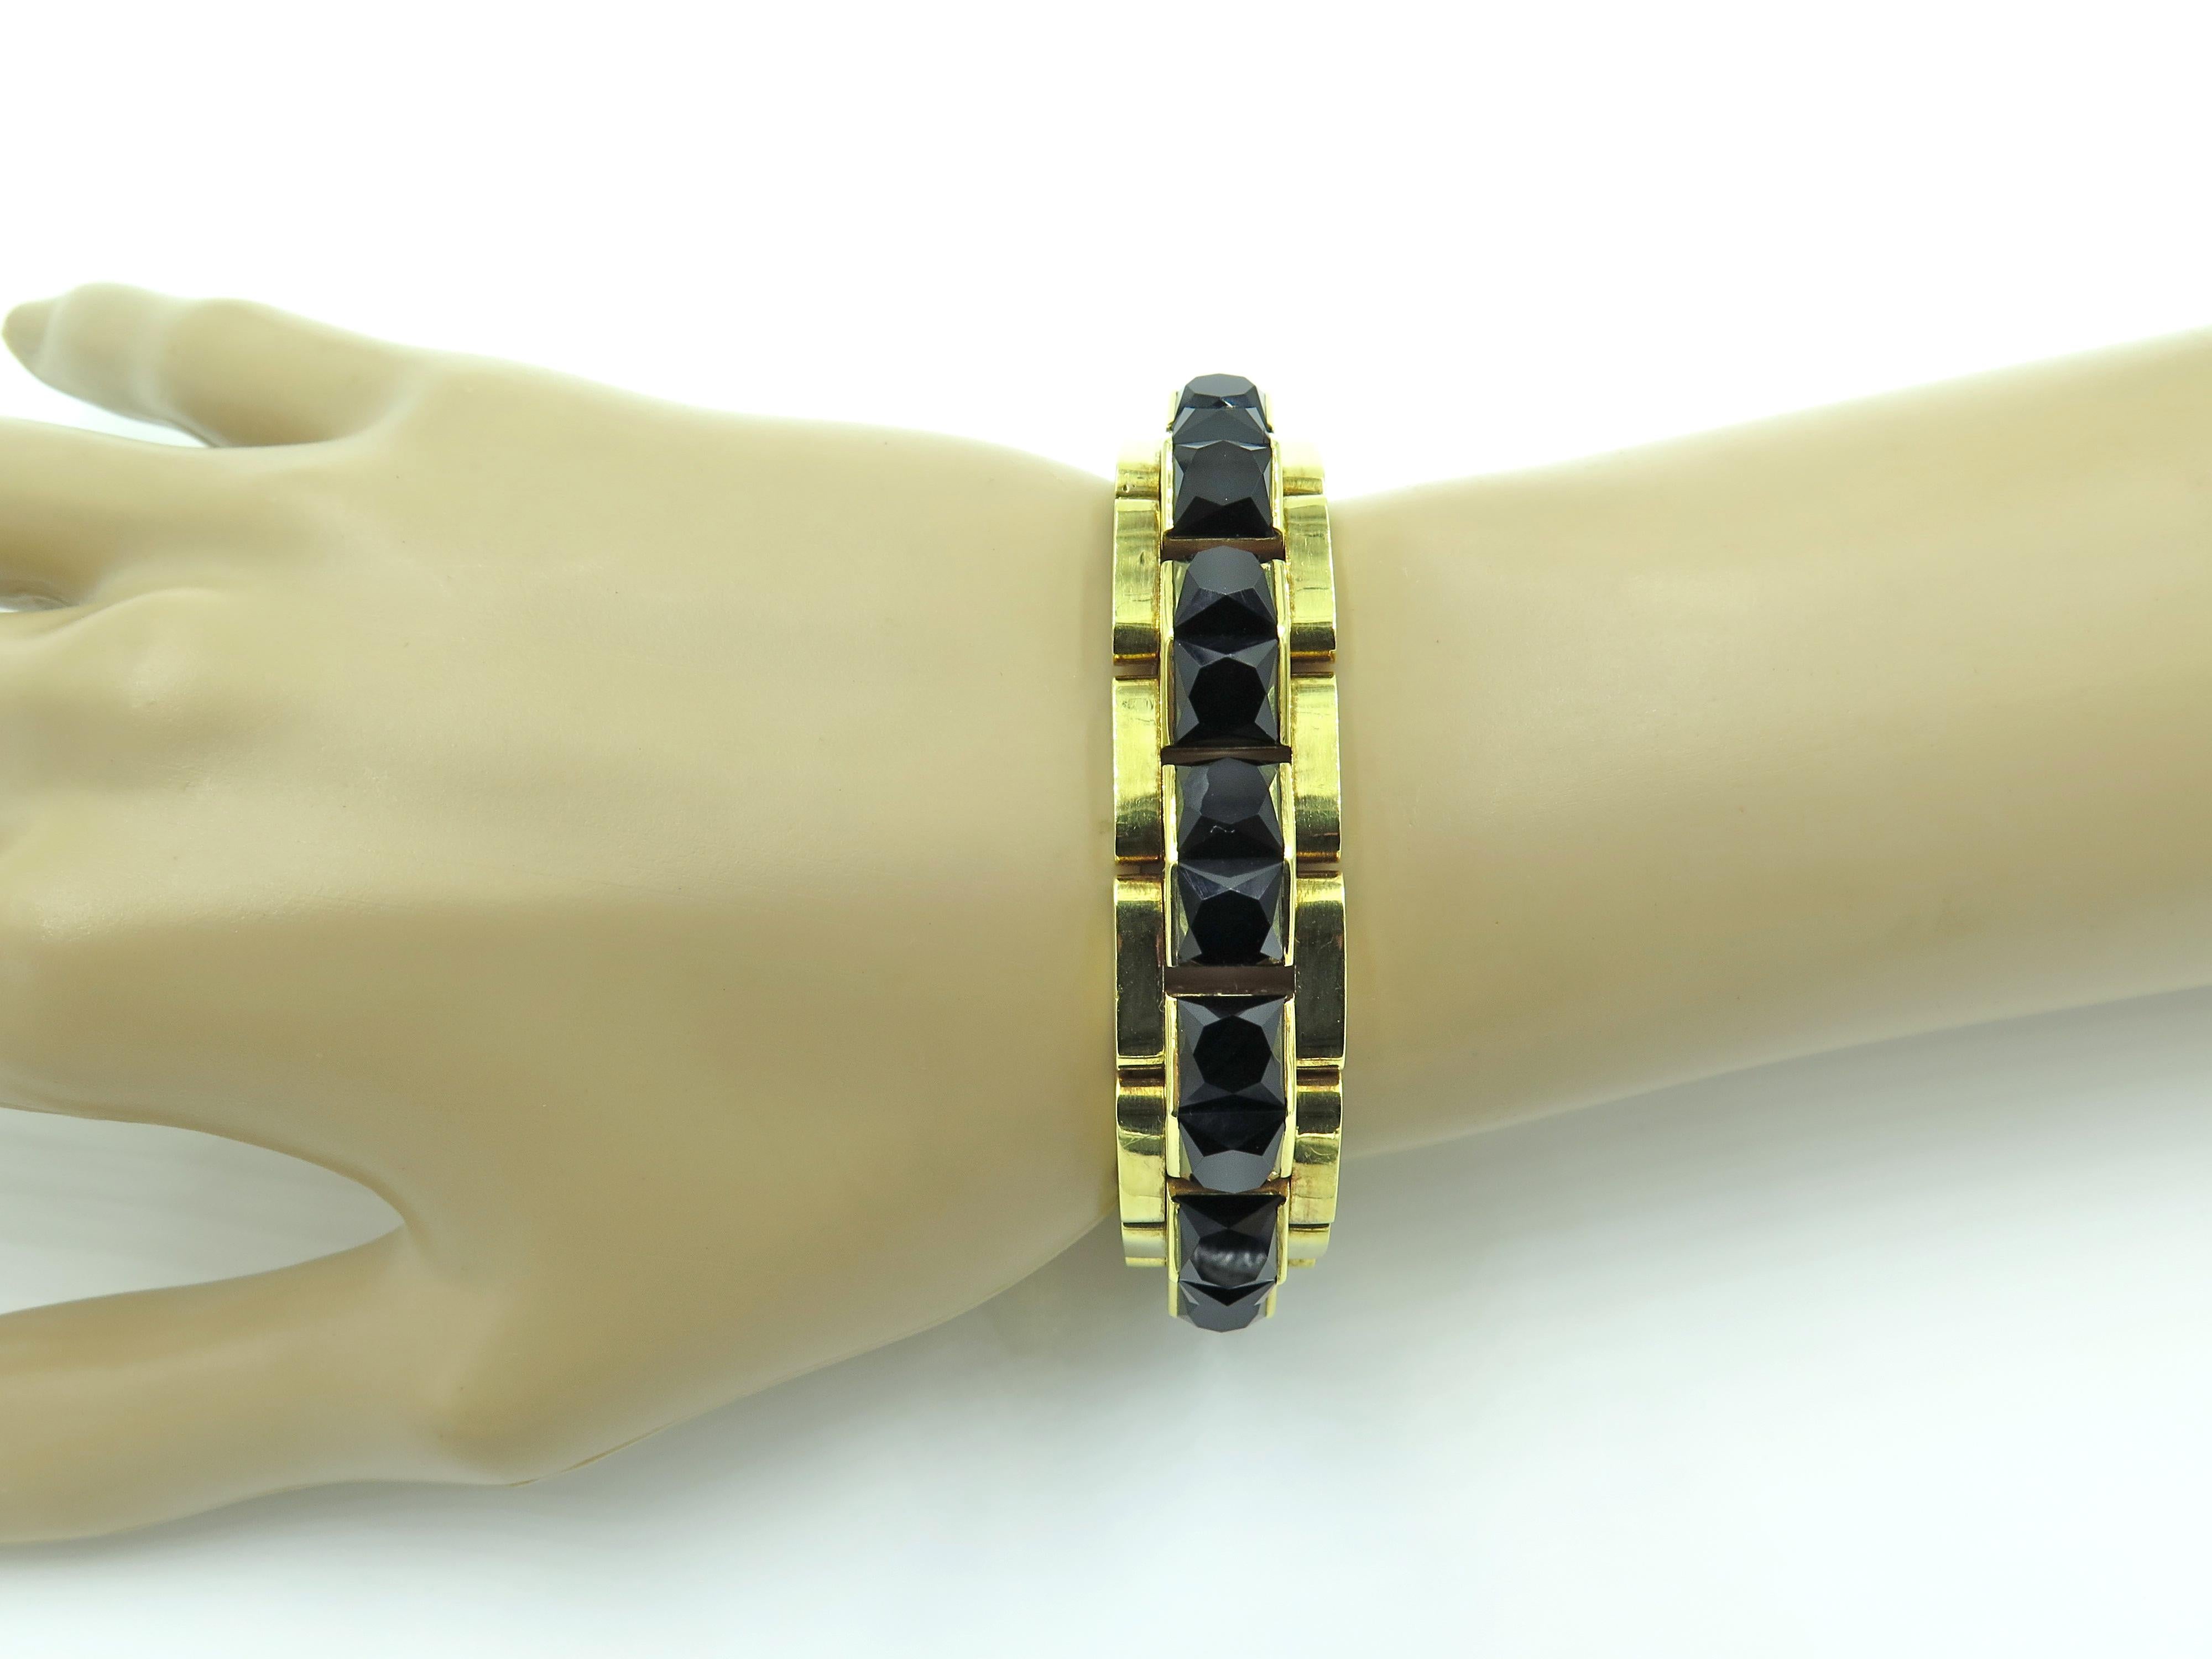 An 18 karat yellow gold and black onyx bracelet, circa 1960.  The bracelet has a central row of pyramidal links set with faceted black onyx.  The bracelet measures 7 1/4 inches in length and 9/16 inch inches in width.